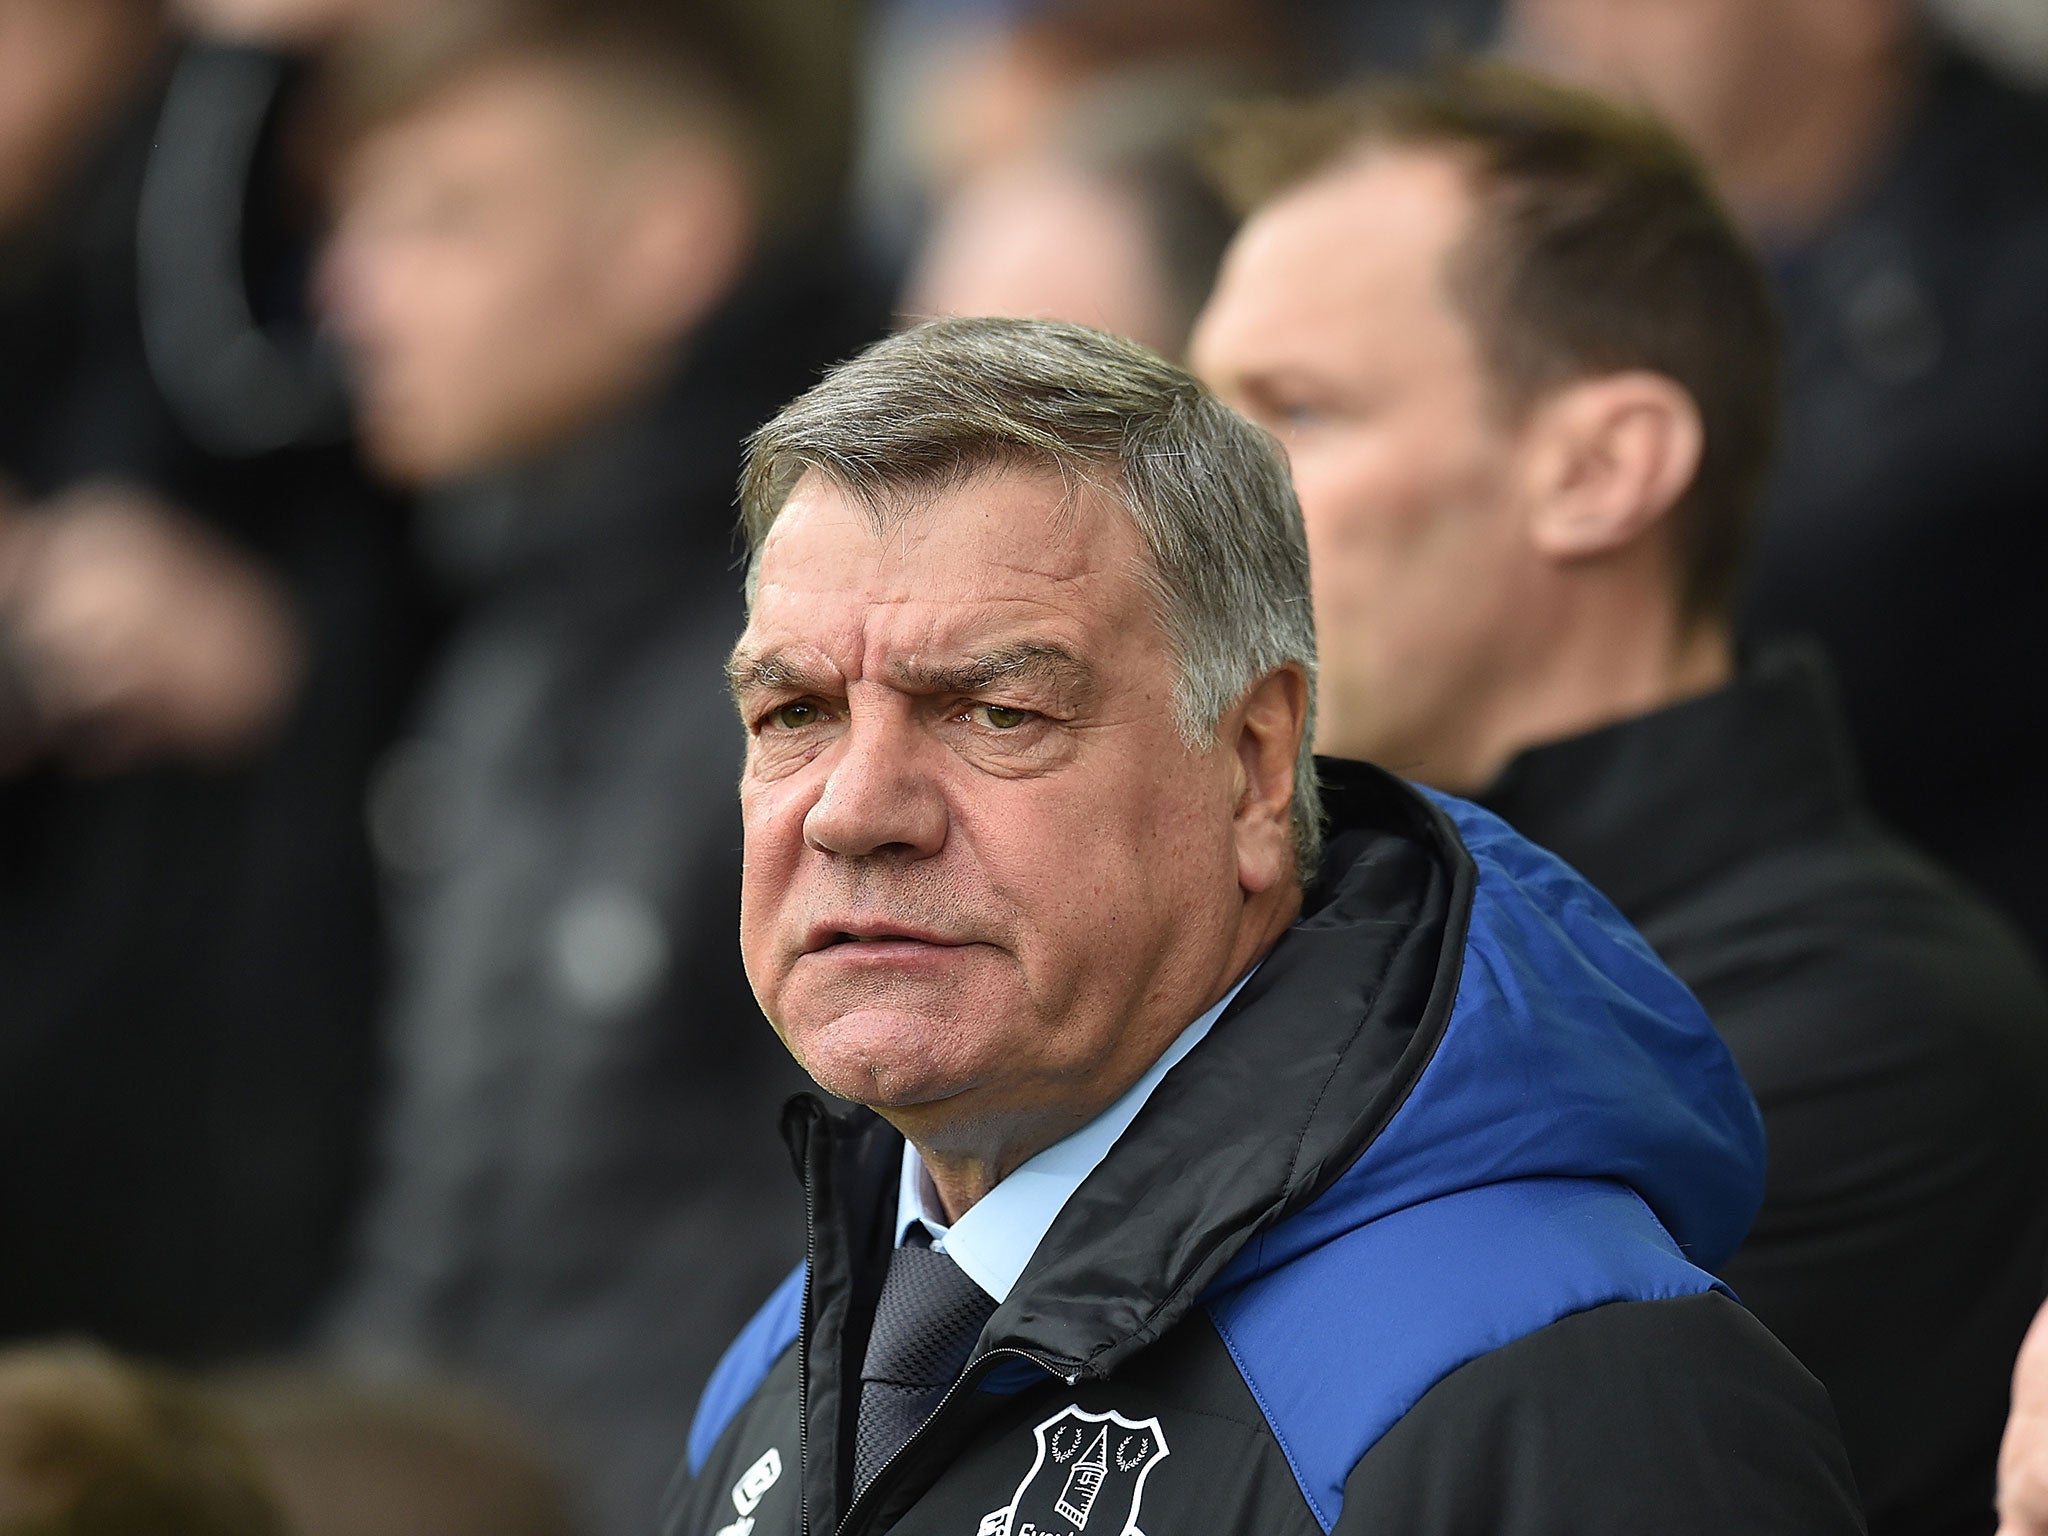 Sam Allardyce may have failed to inspire at Everton but he's helped stabilise the club